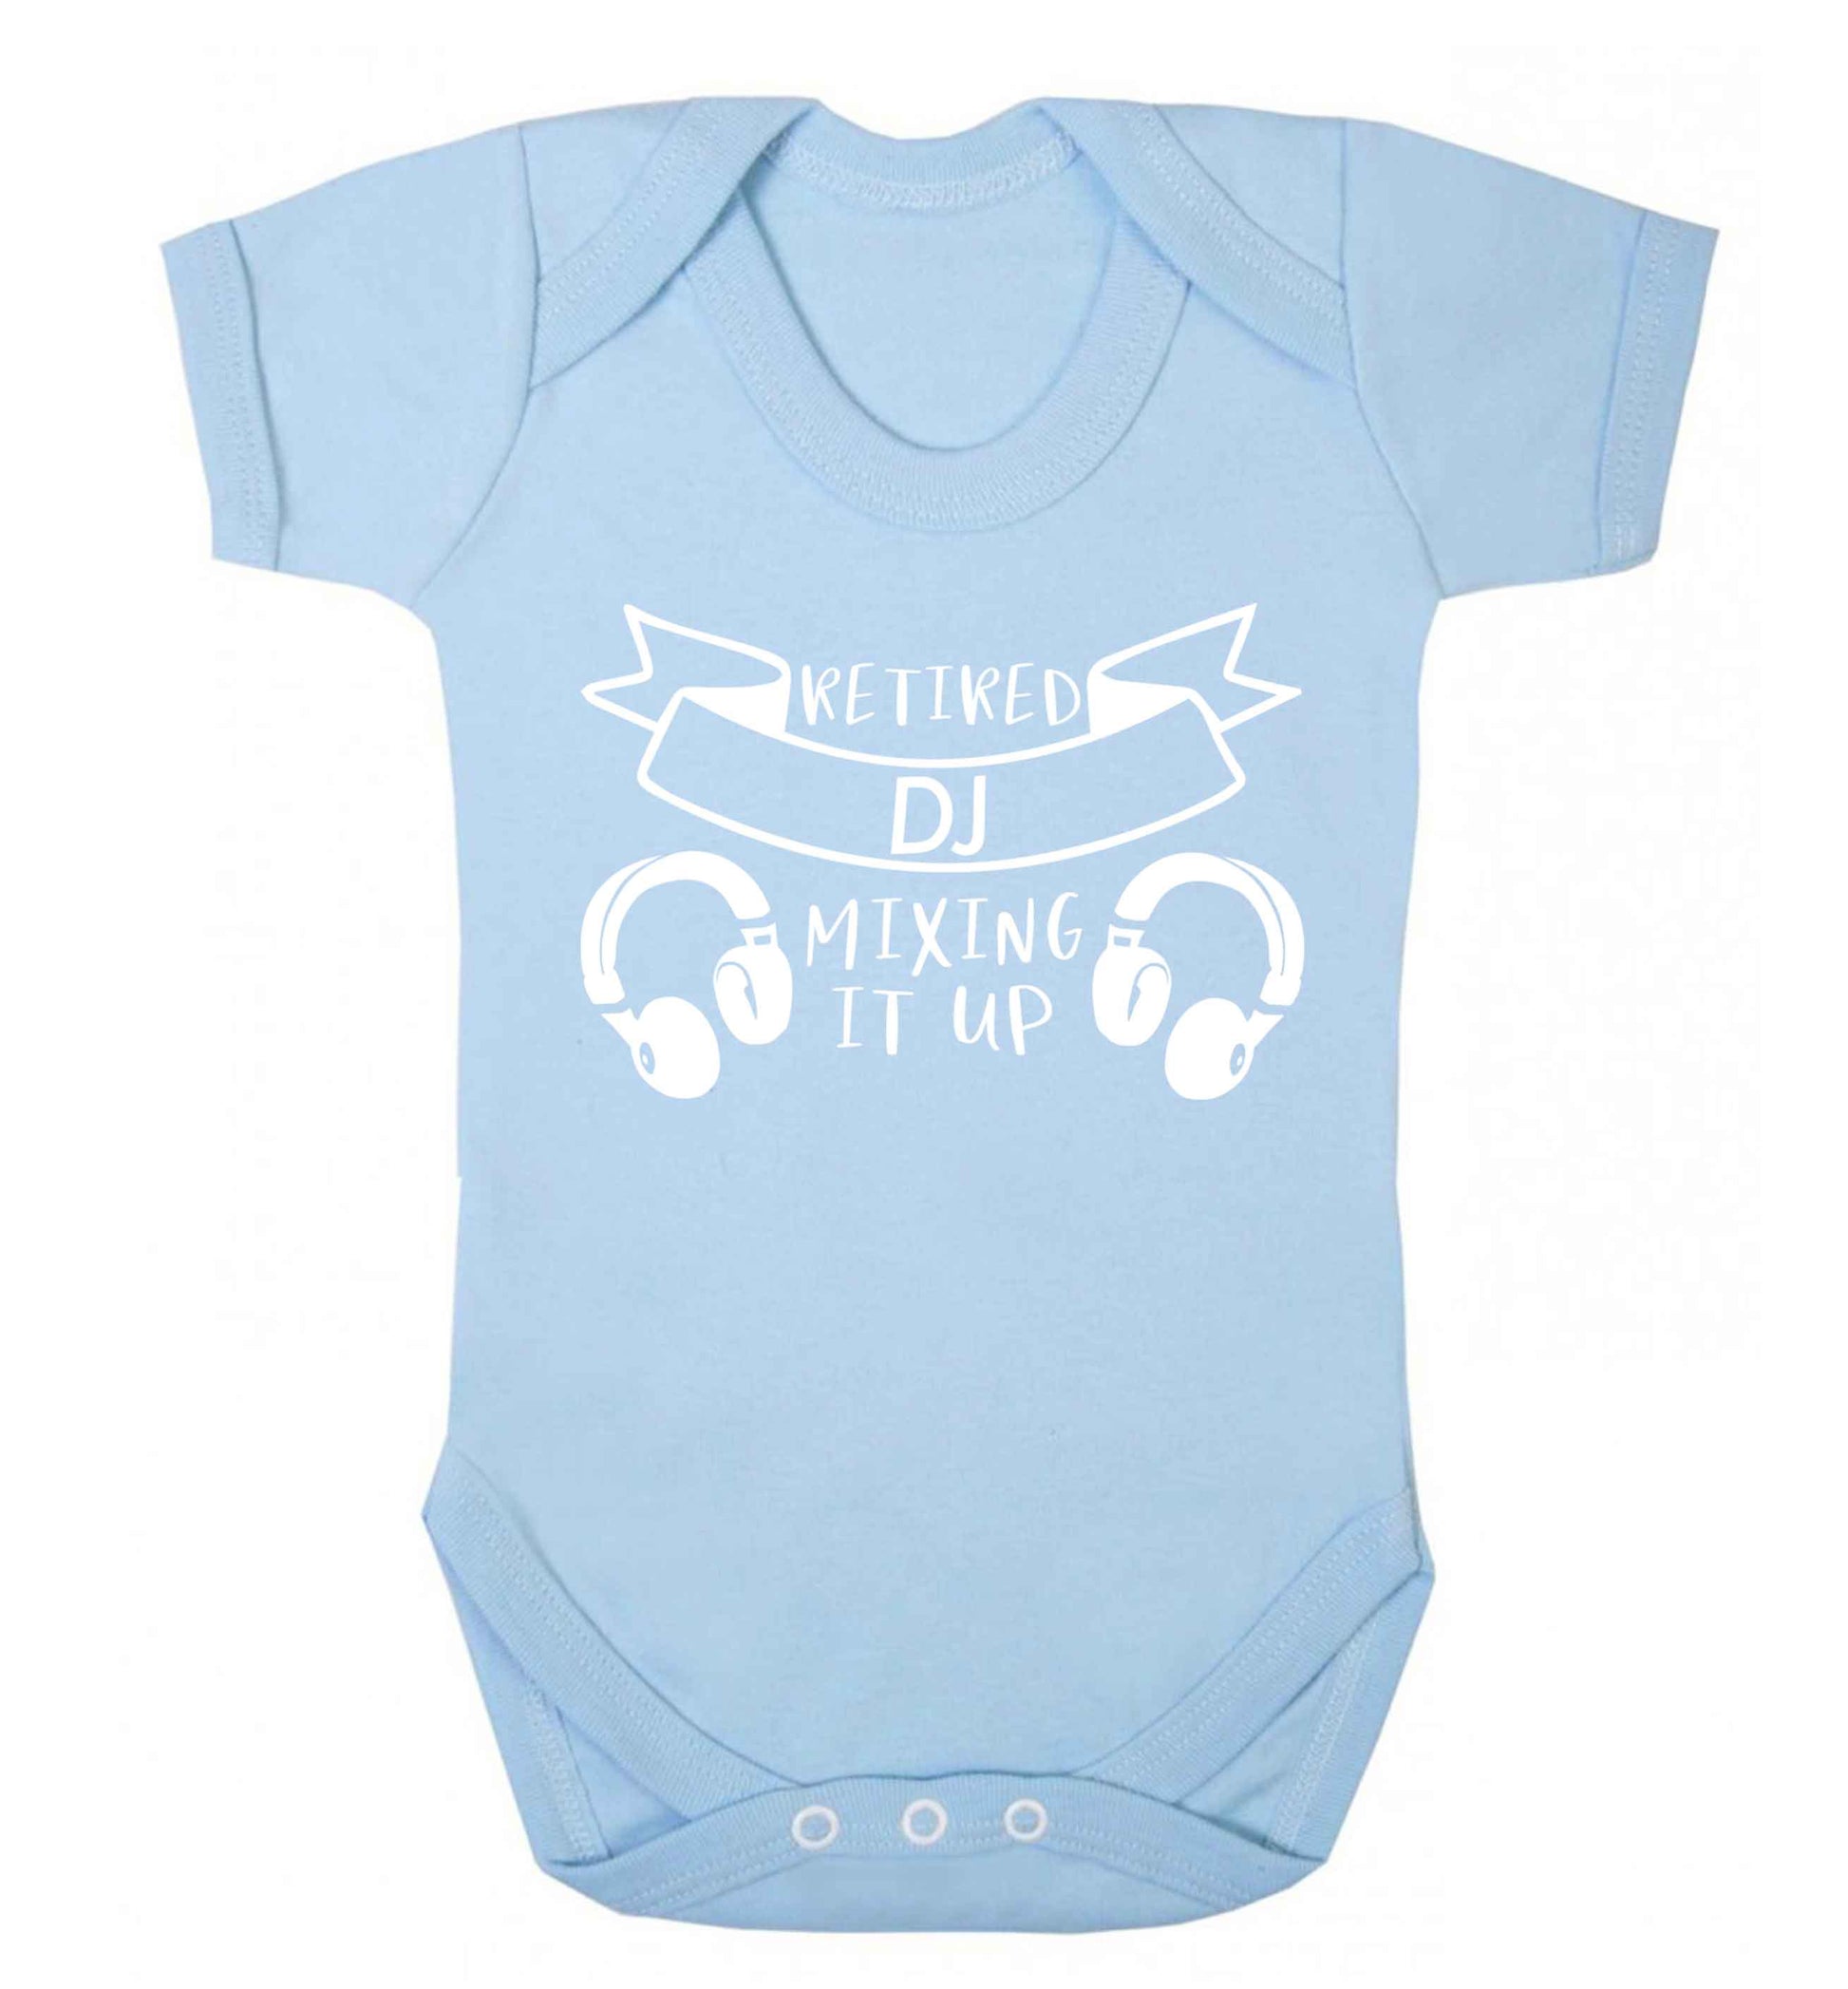 Retired DJ mixing it up Baby Vest pale blue 18-24 months